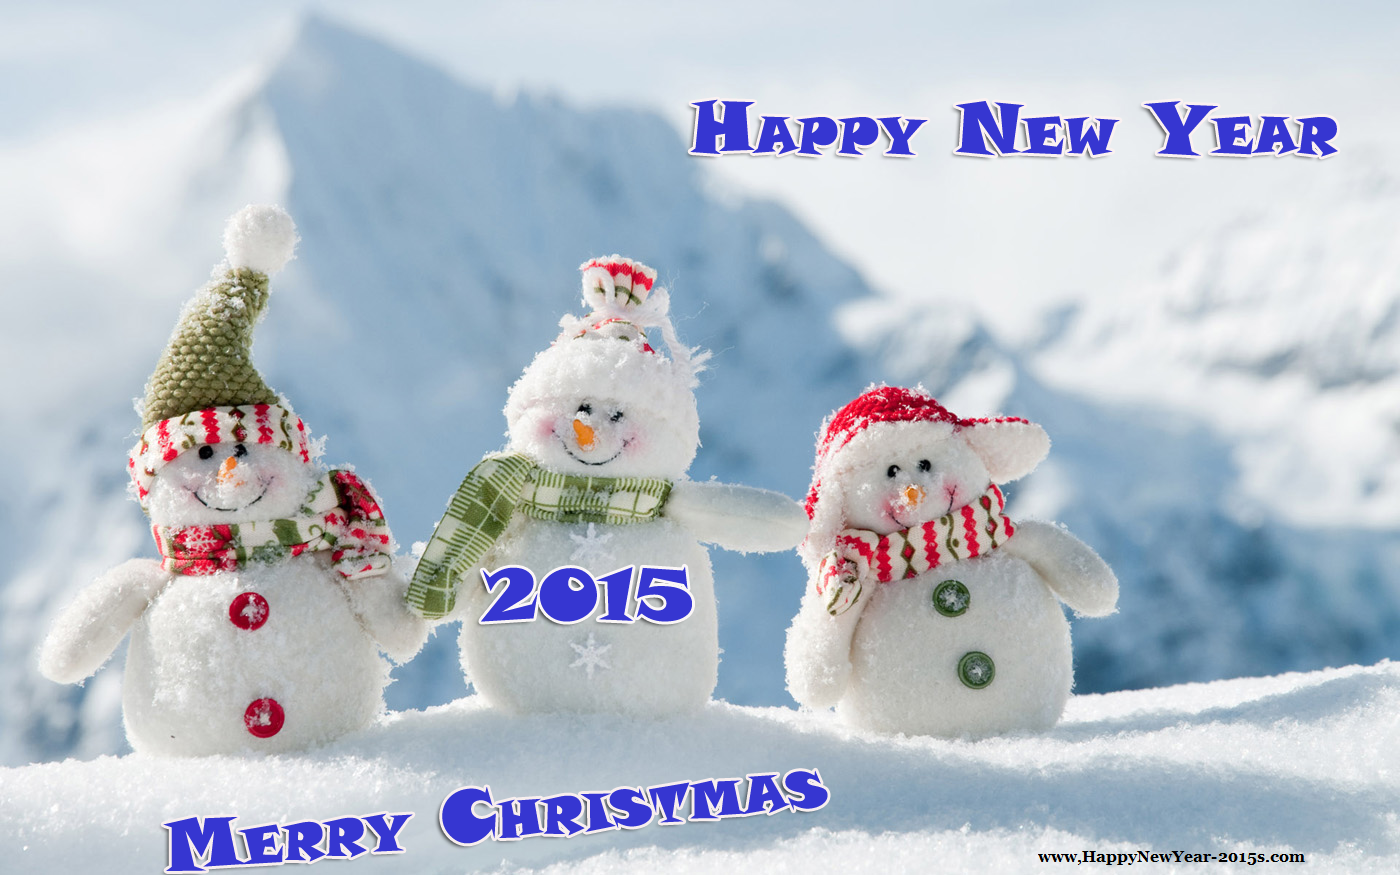 Merry Christmas Happy New Year Picture Wallpaper With